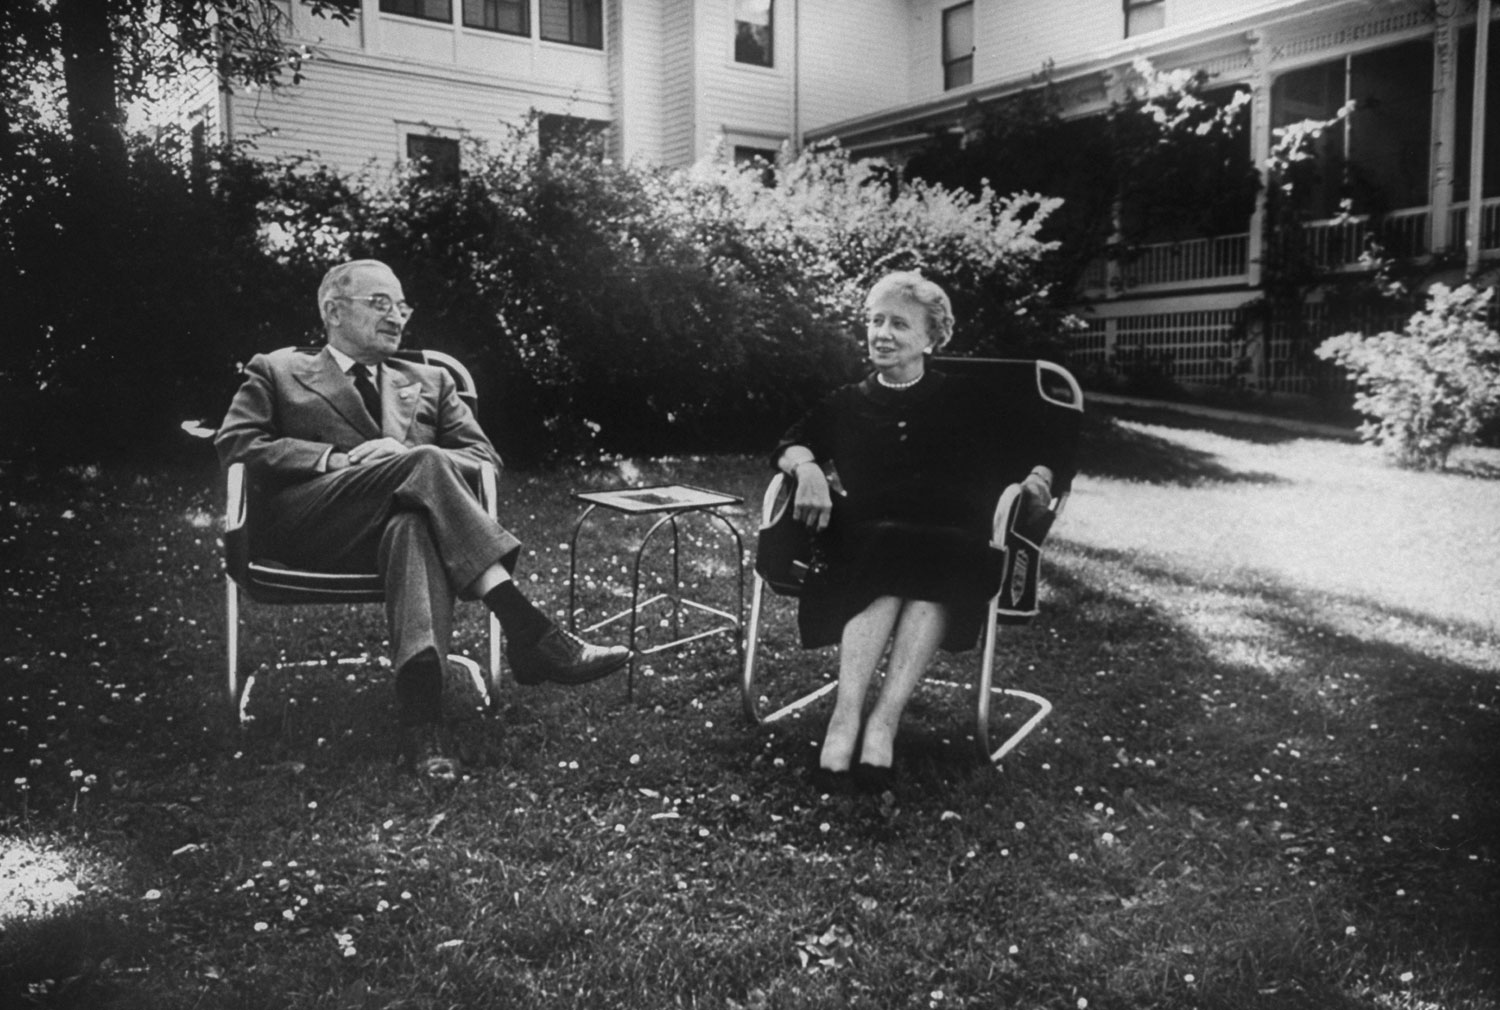 Former president Harry Truman and wife Bess in their back yard in Independence, Missouri, 1955.